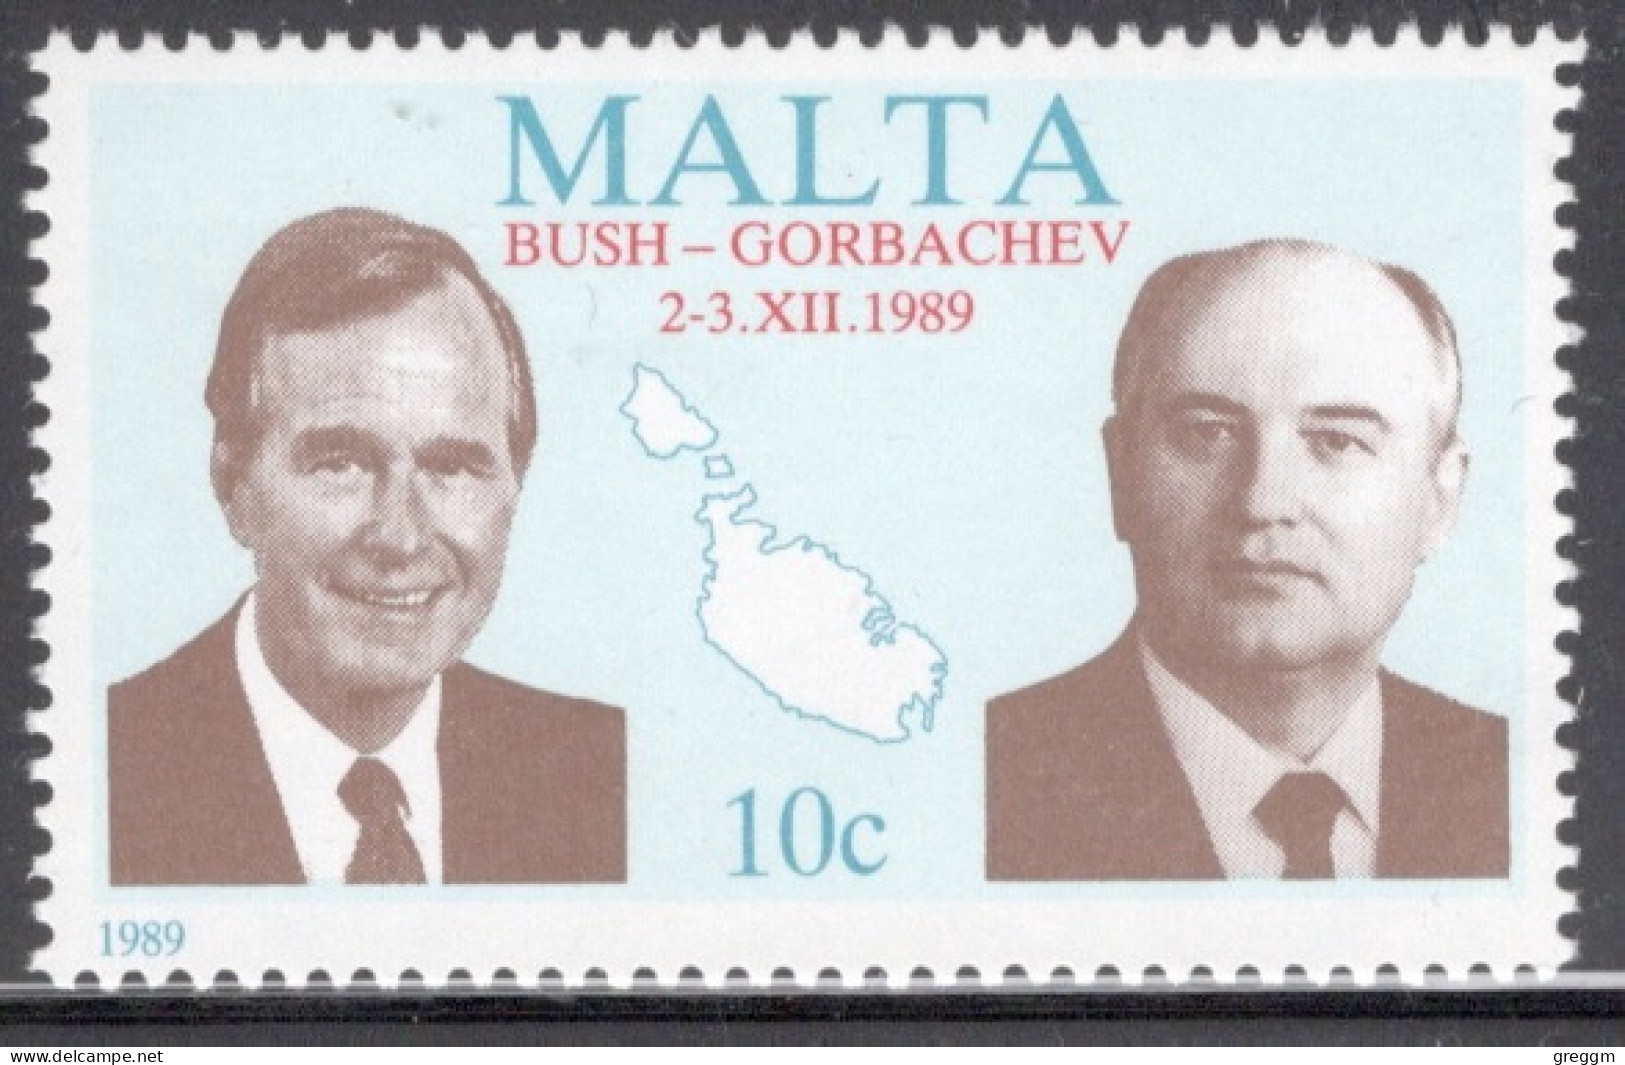 Malta 1989 Stamp To Celebrate George Bush And Mikhail Gorbachev In Unmounted Mint. - Malte